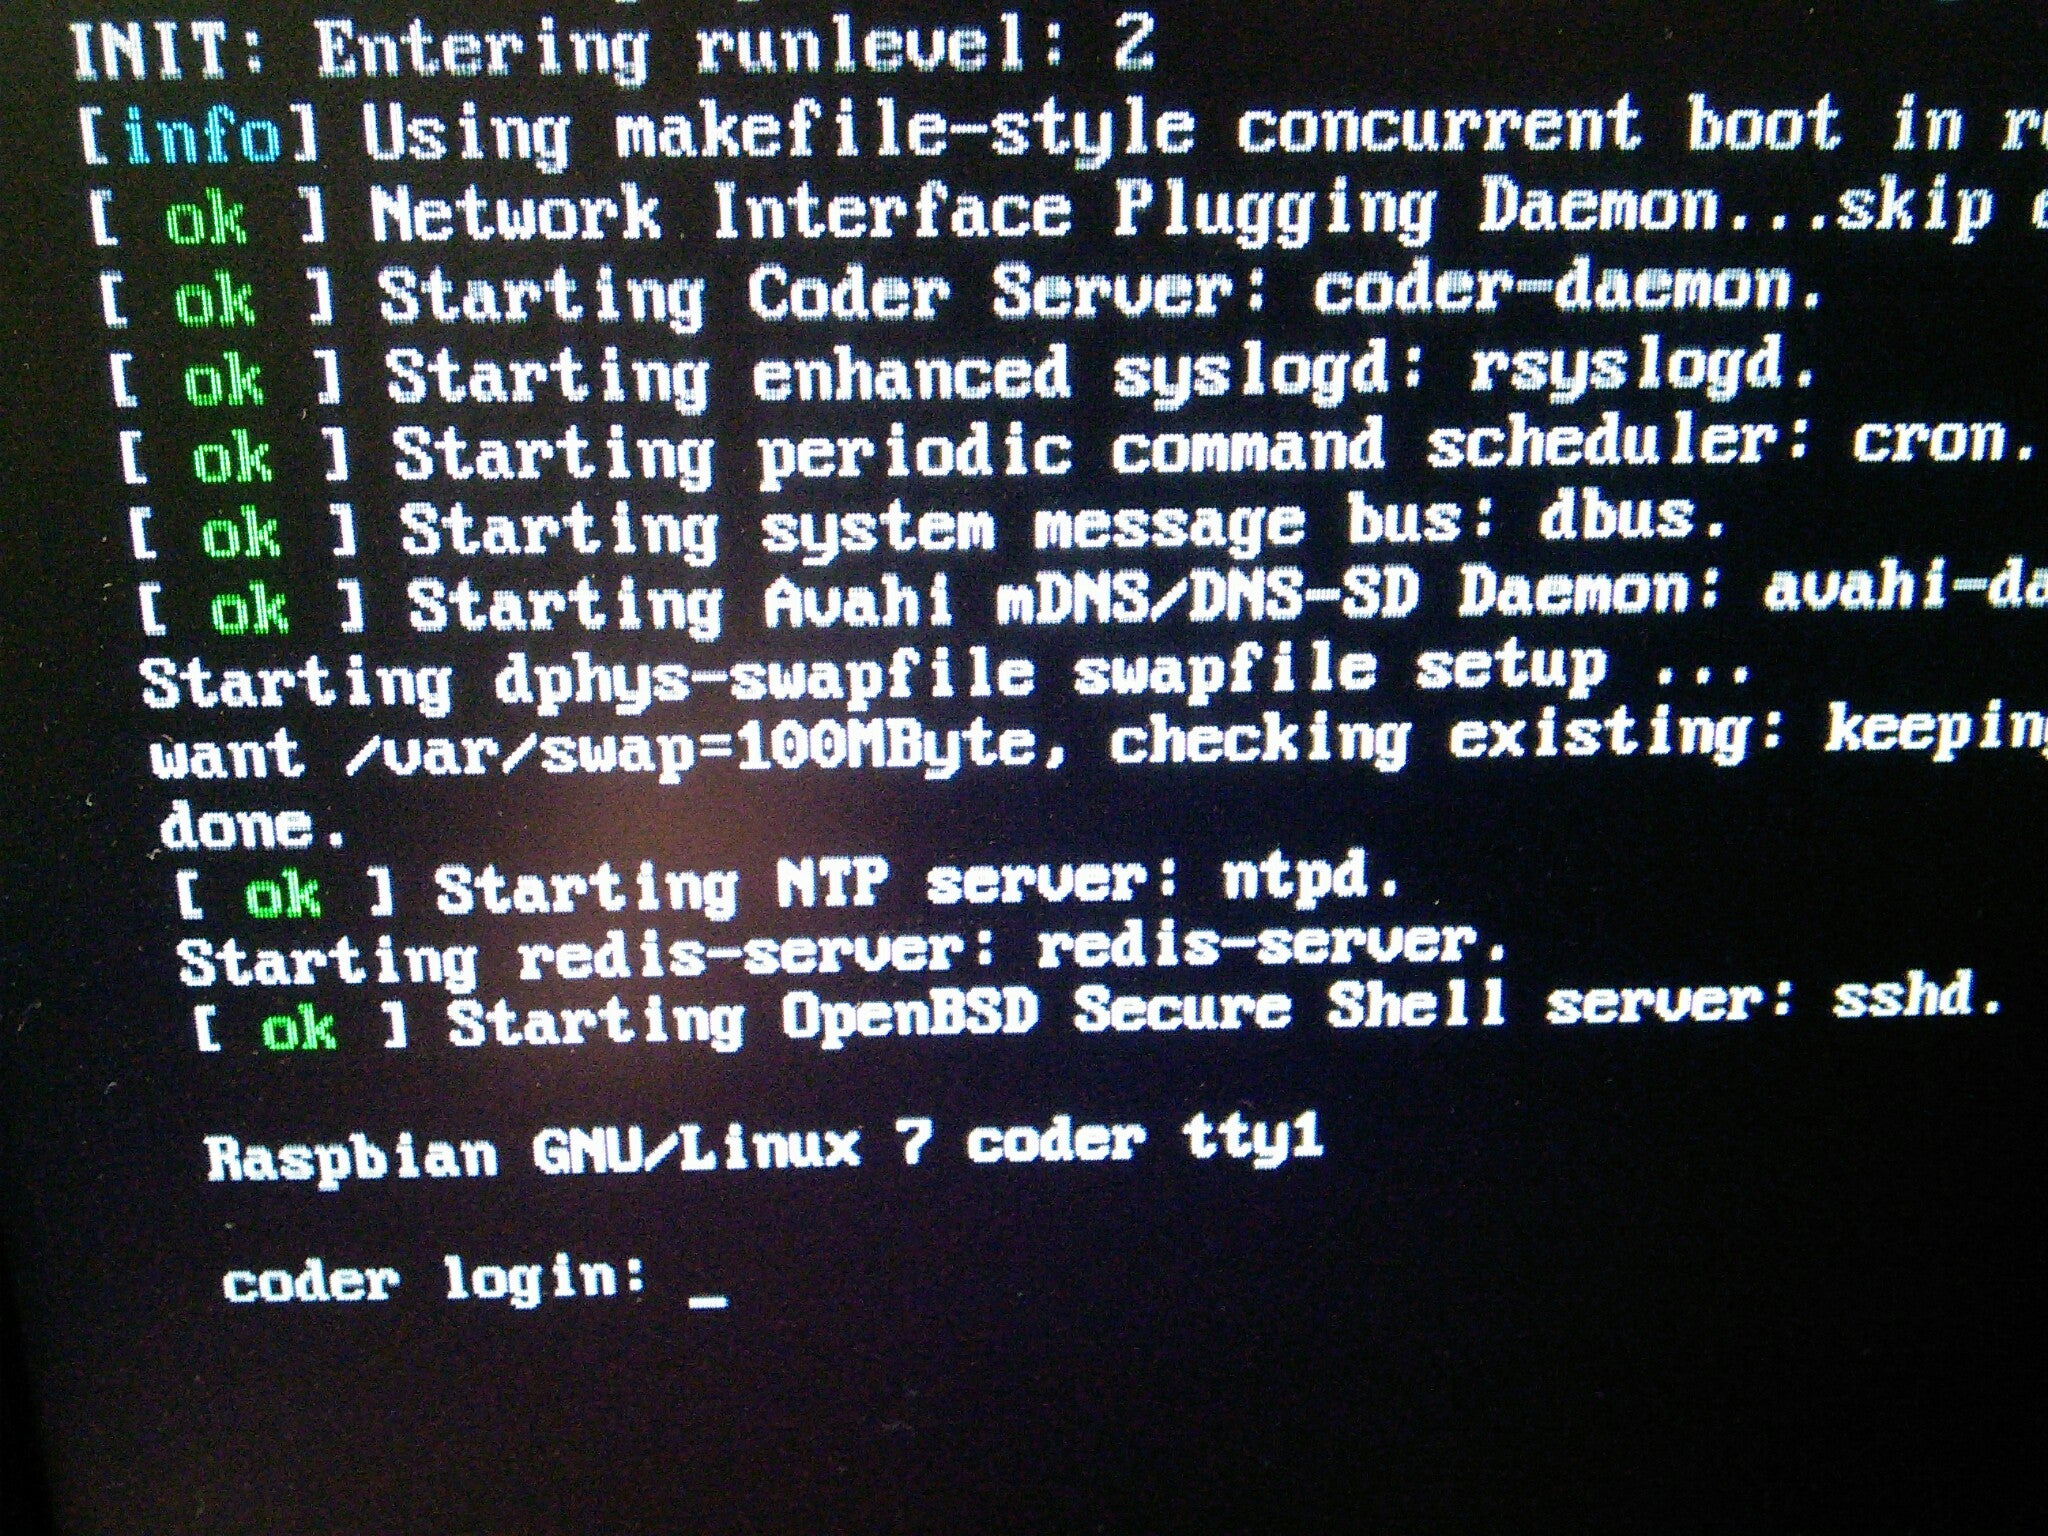 Booting process as Coder set up the Raspberry Pi as a Server